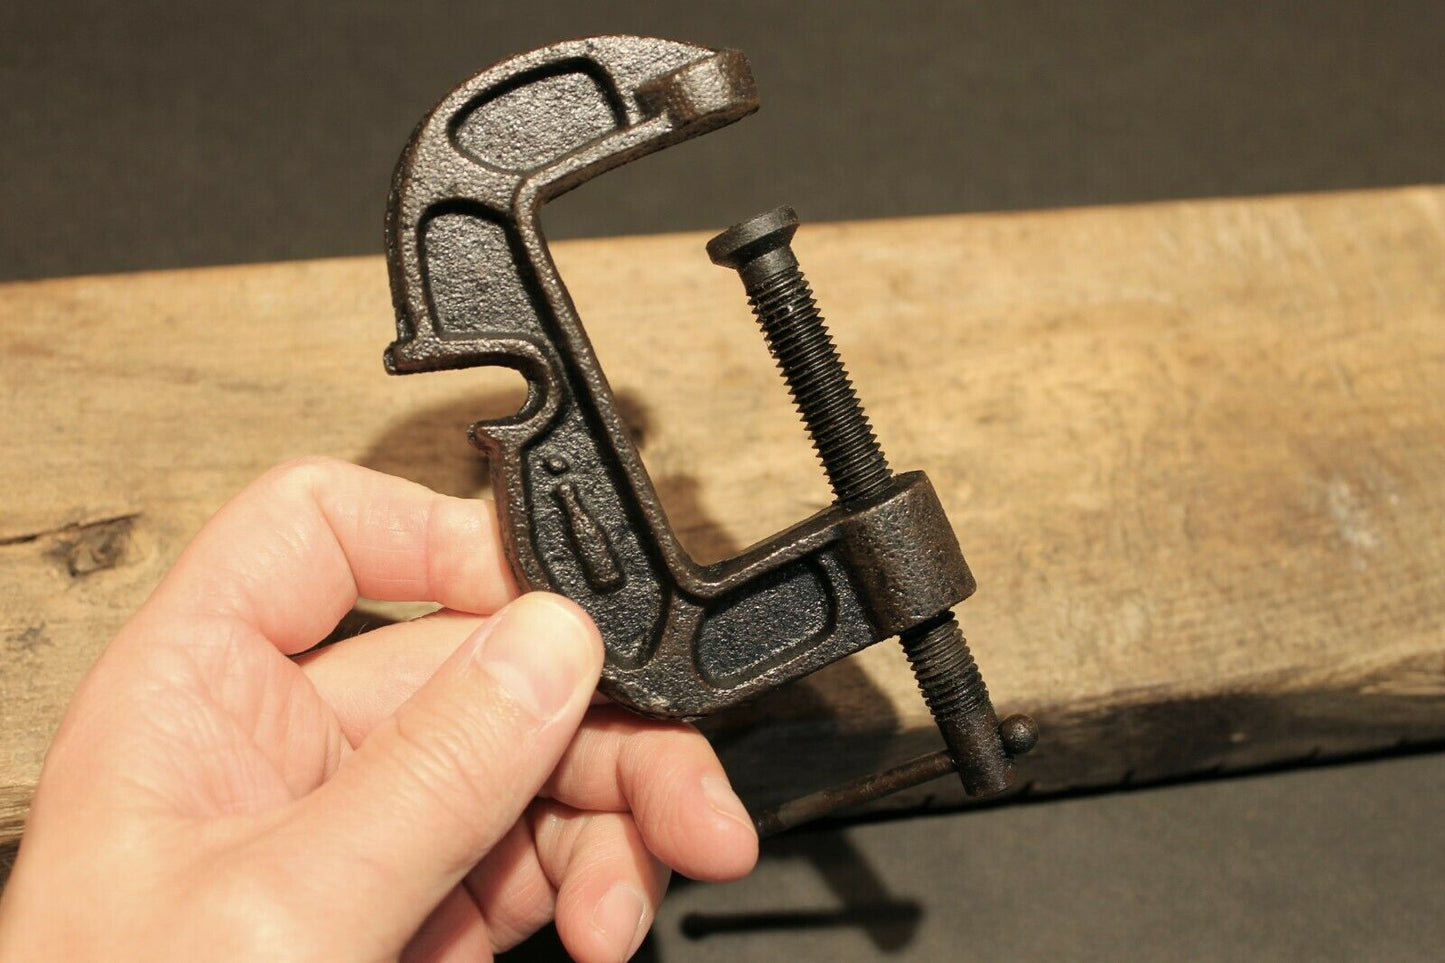 Antique Vintage Style Cast Iron Table Clamp Bottle Opener - Early Home Decor